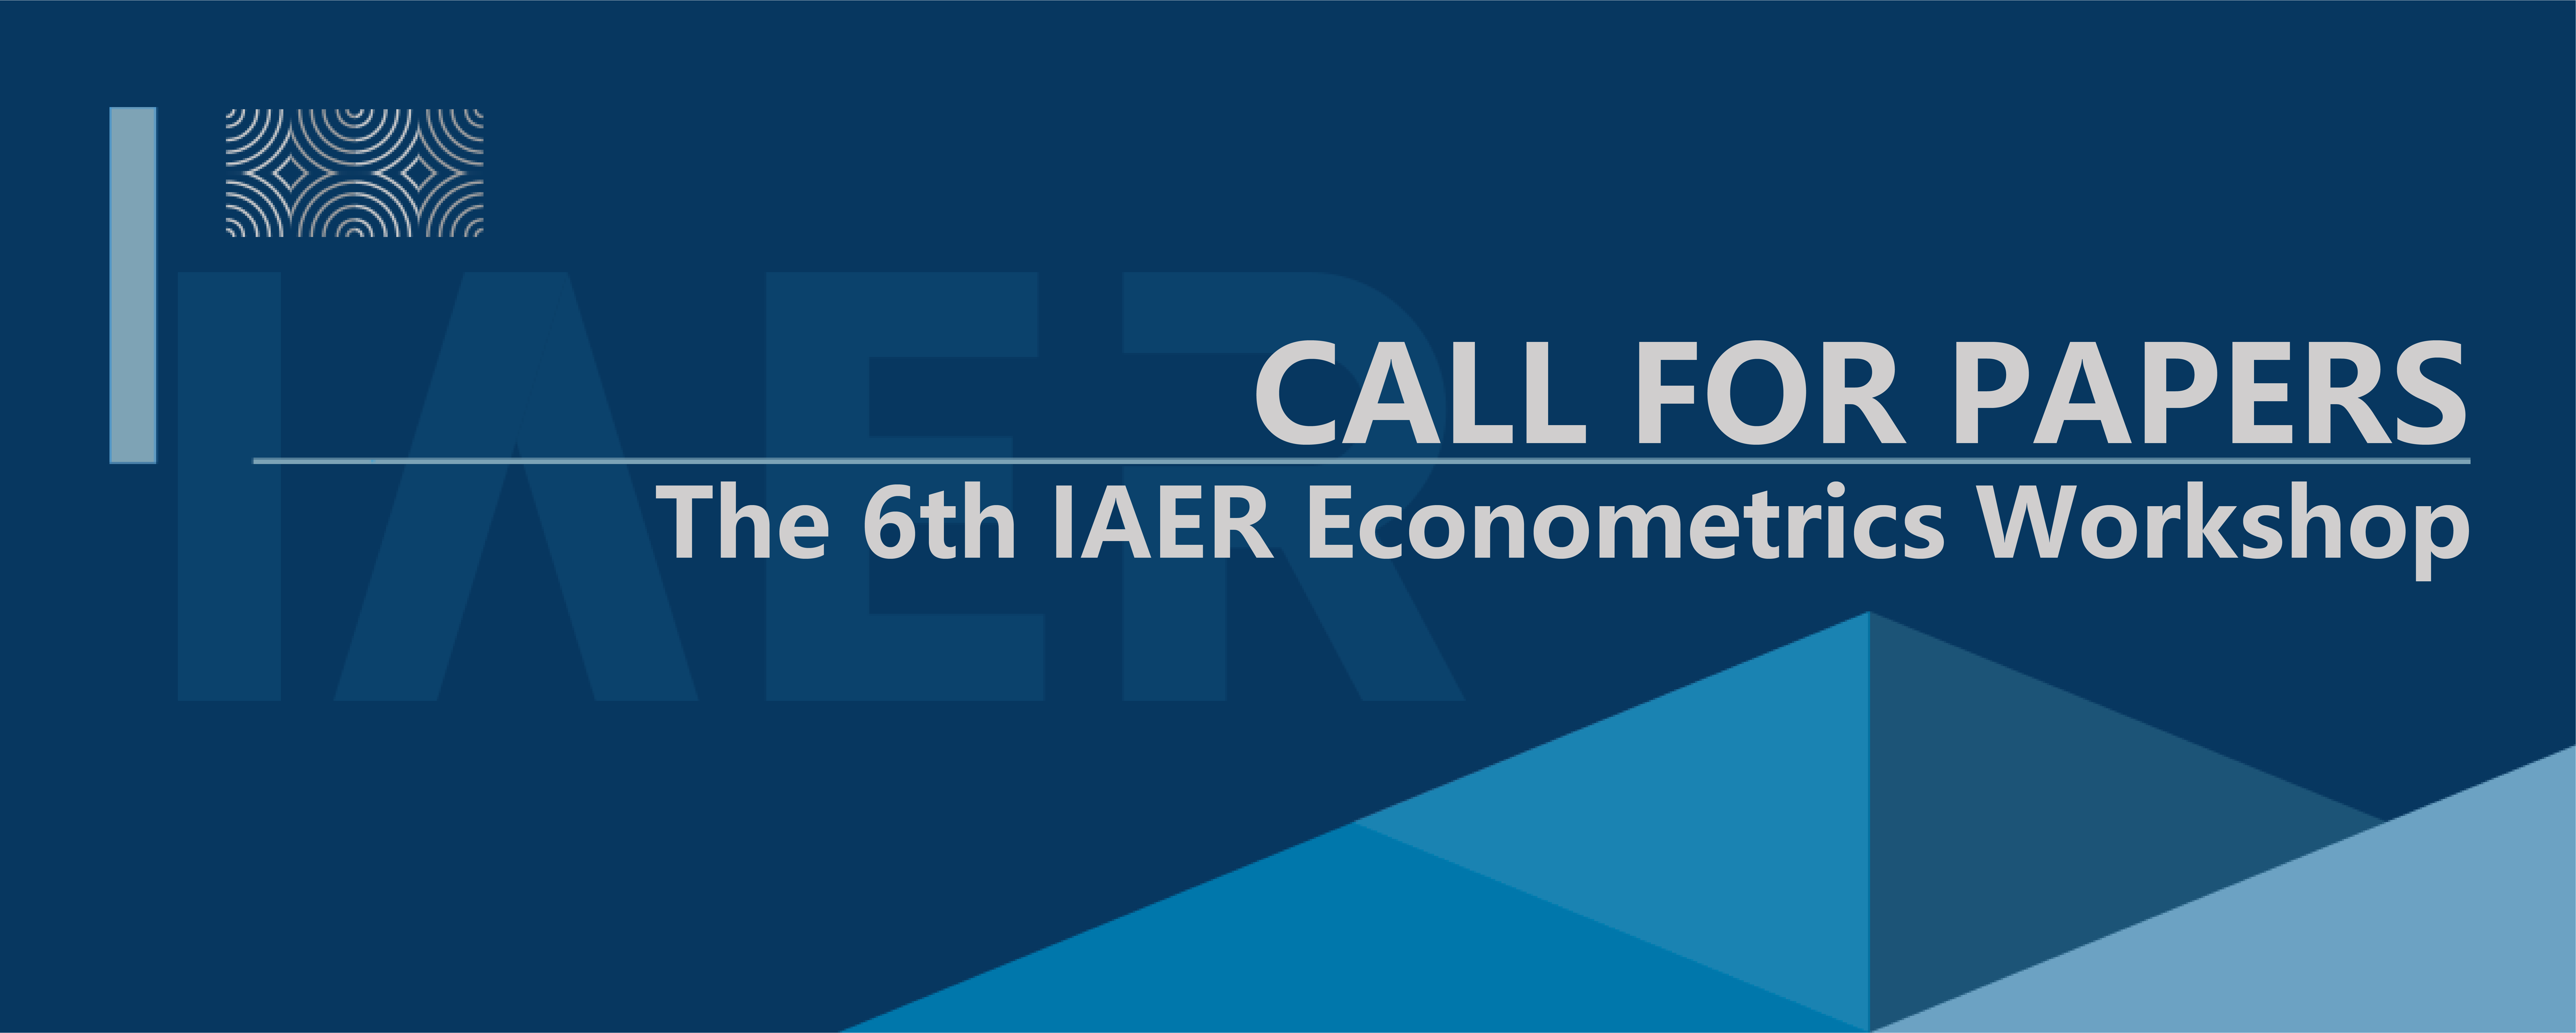 Call for Papers  The 6th IAER Econometrics Workshop